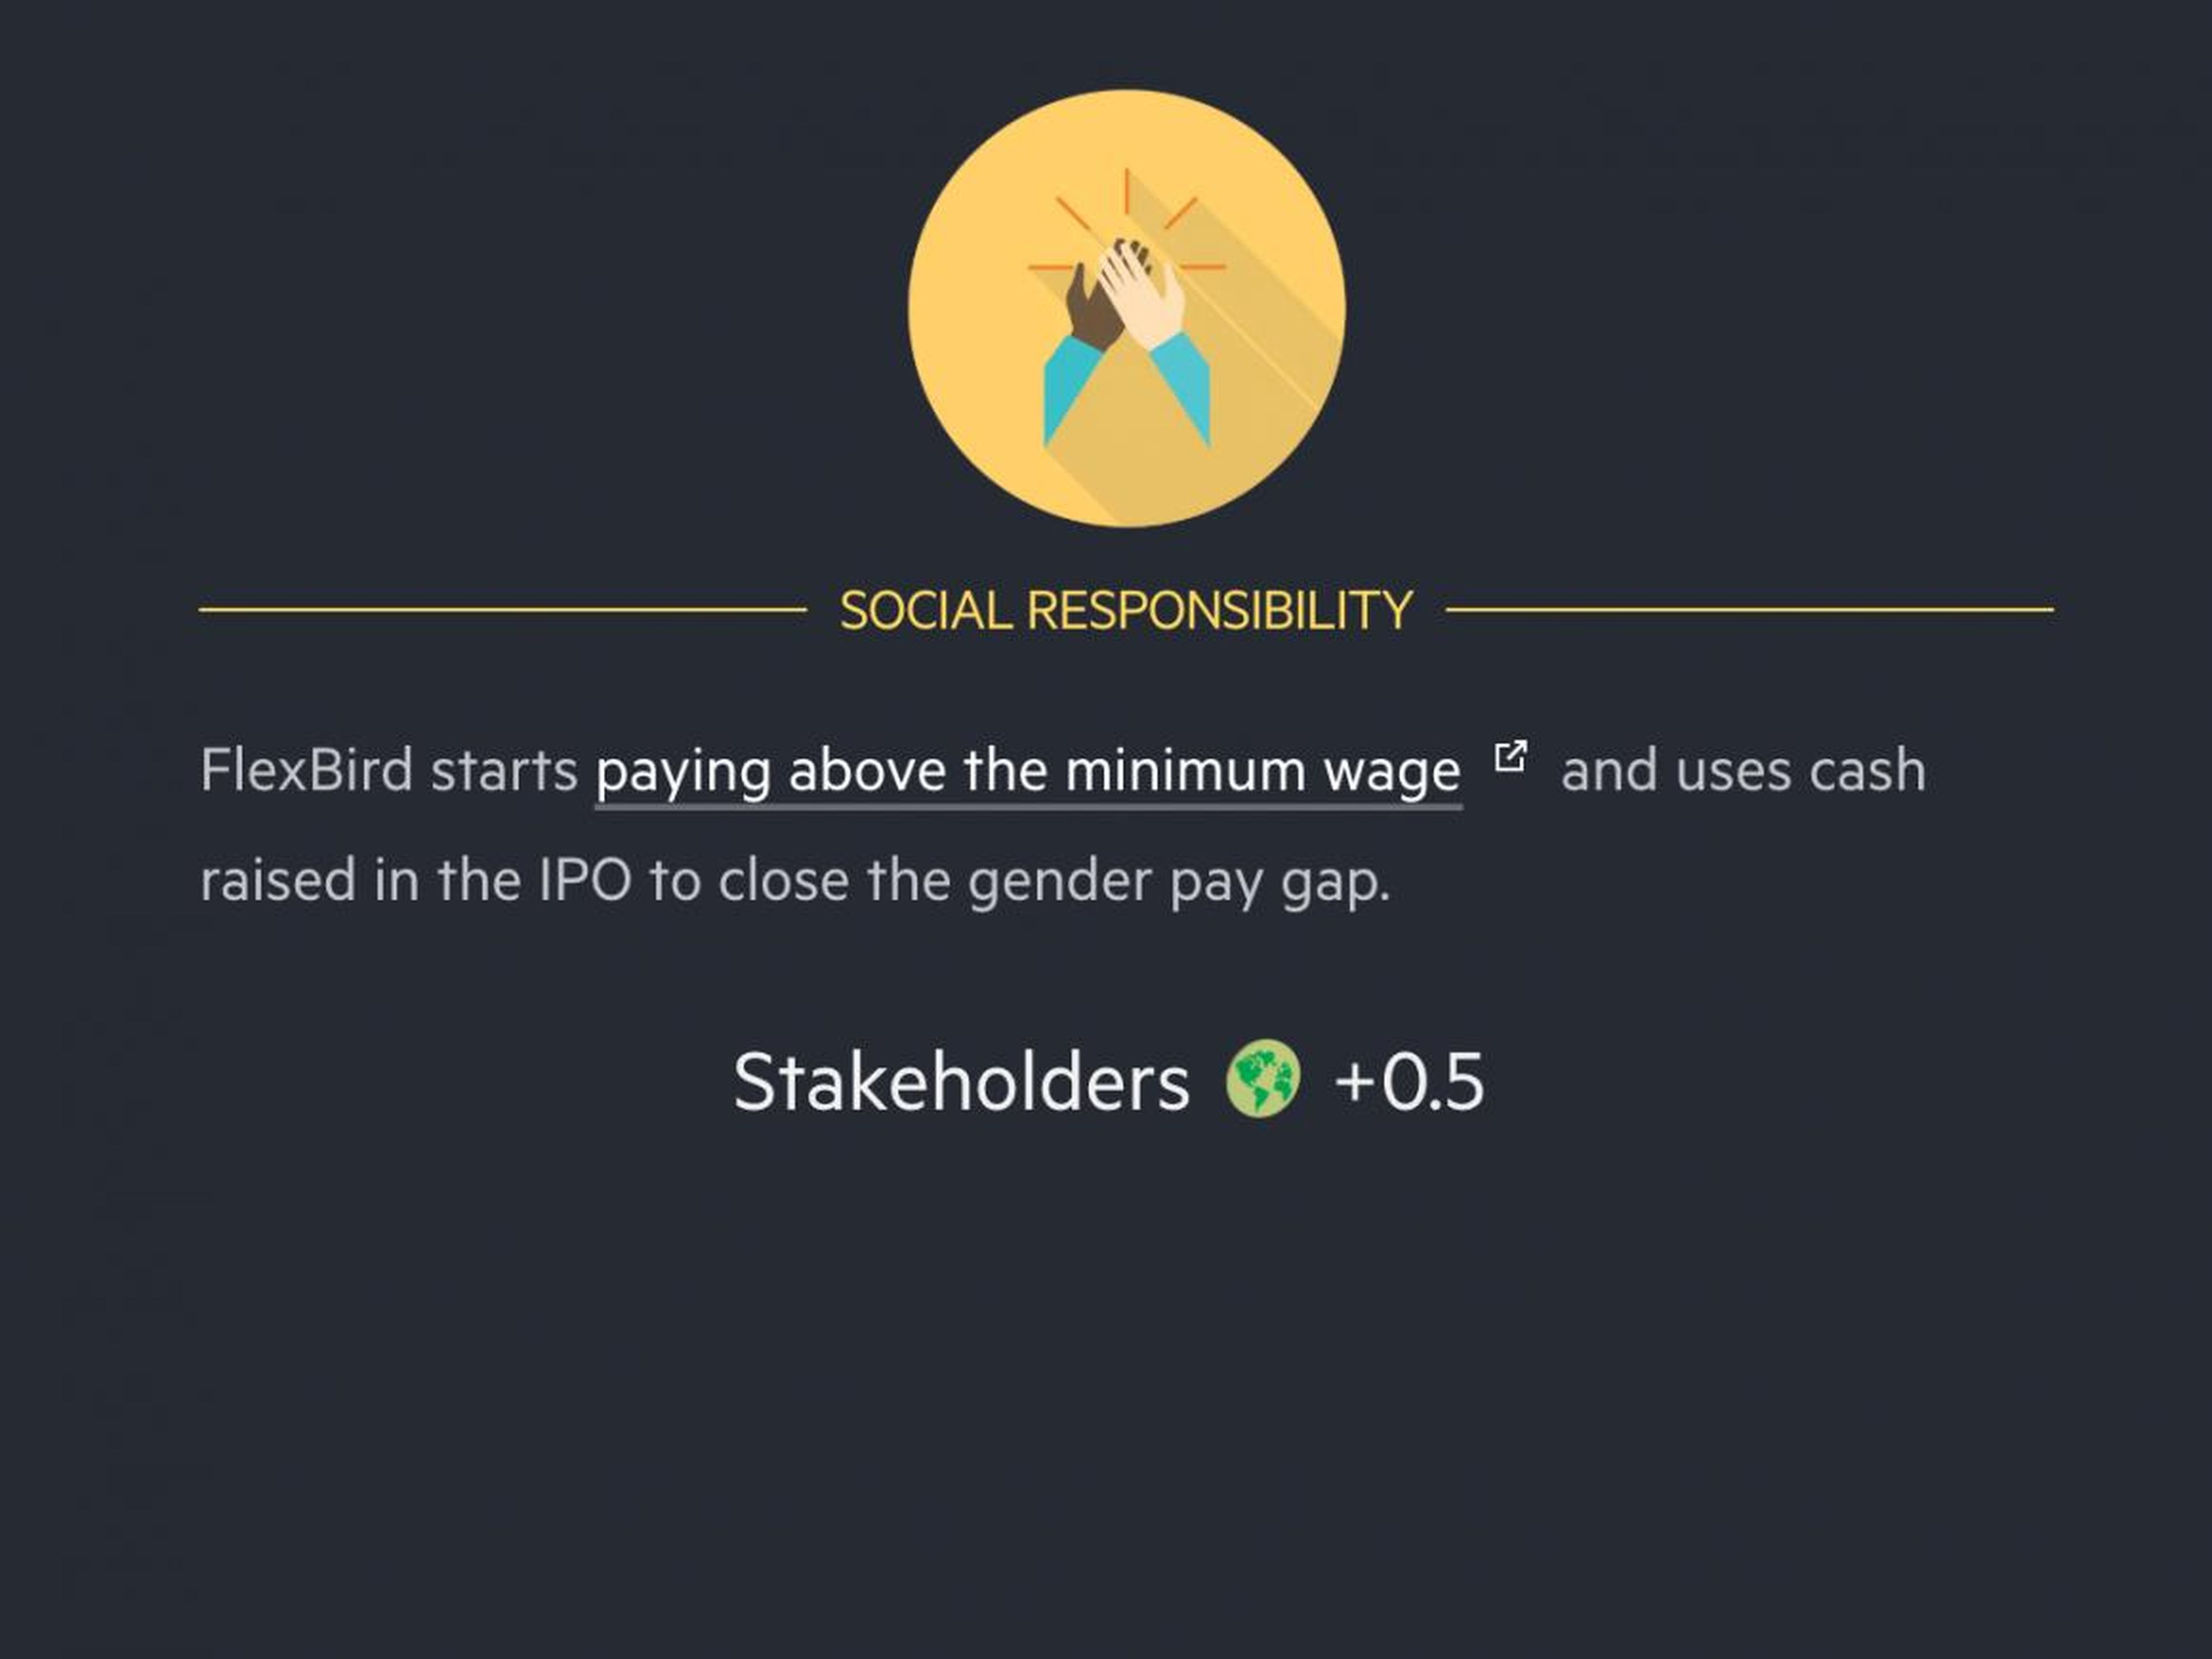 Social responsibility is off to a good start.